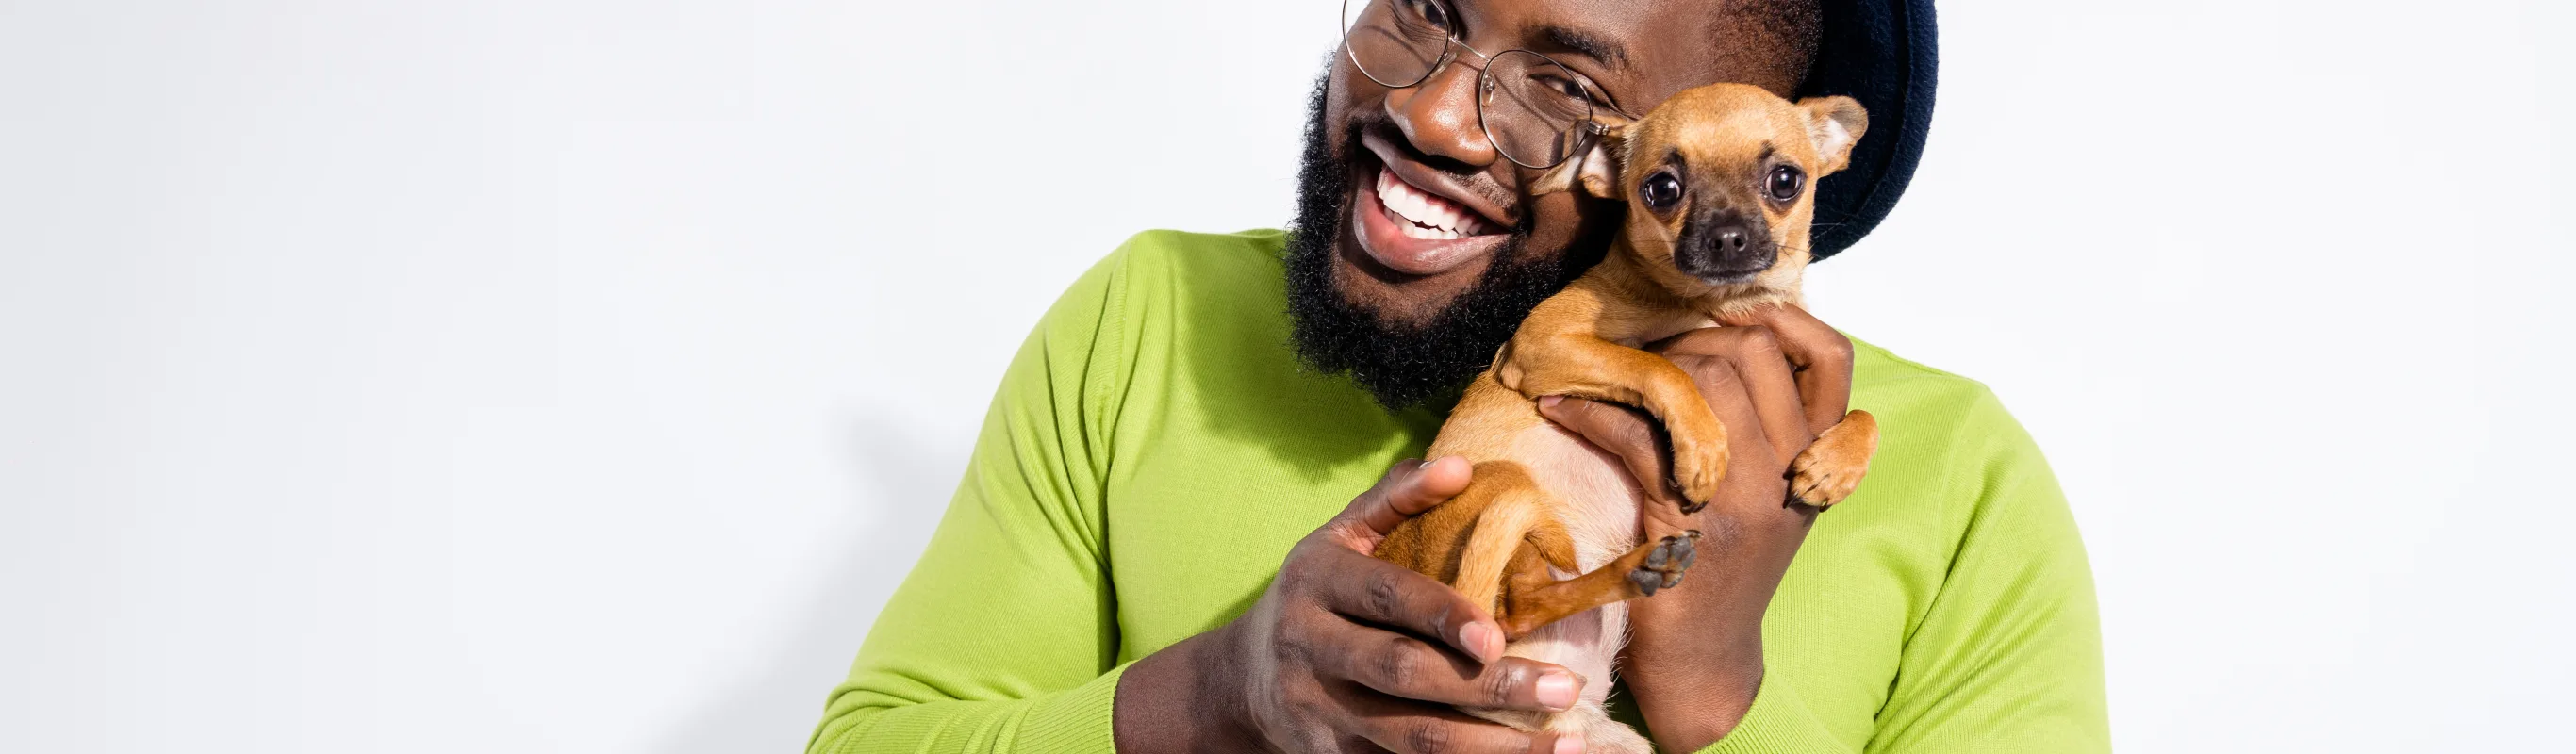 Man wearing green shirt and hat holding a puppy to his face